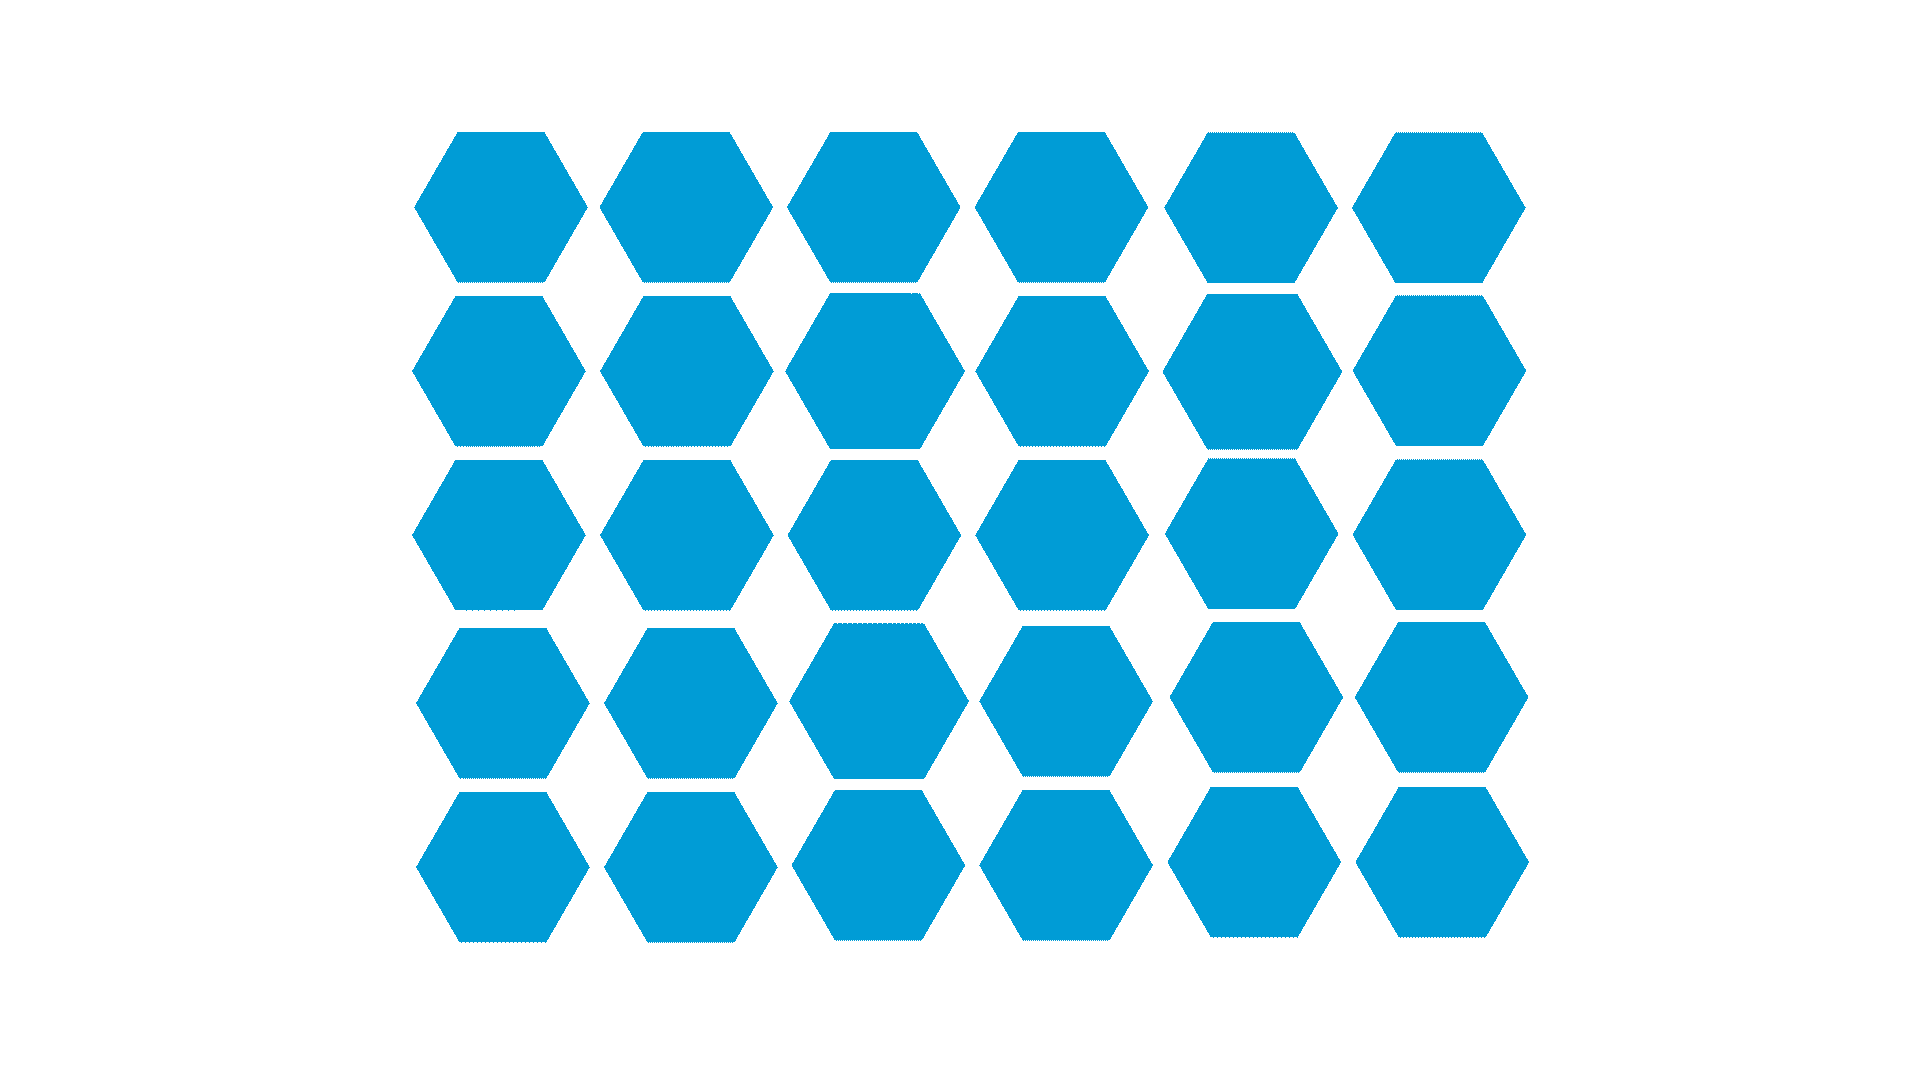 This animation transforms 30 blue hexagons aligned and in a tight group and divides this one group into 5 groups of varying numbers of blue hexagons.